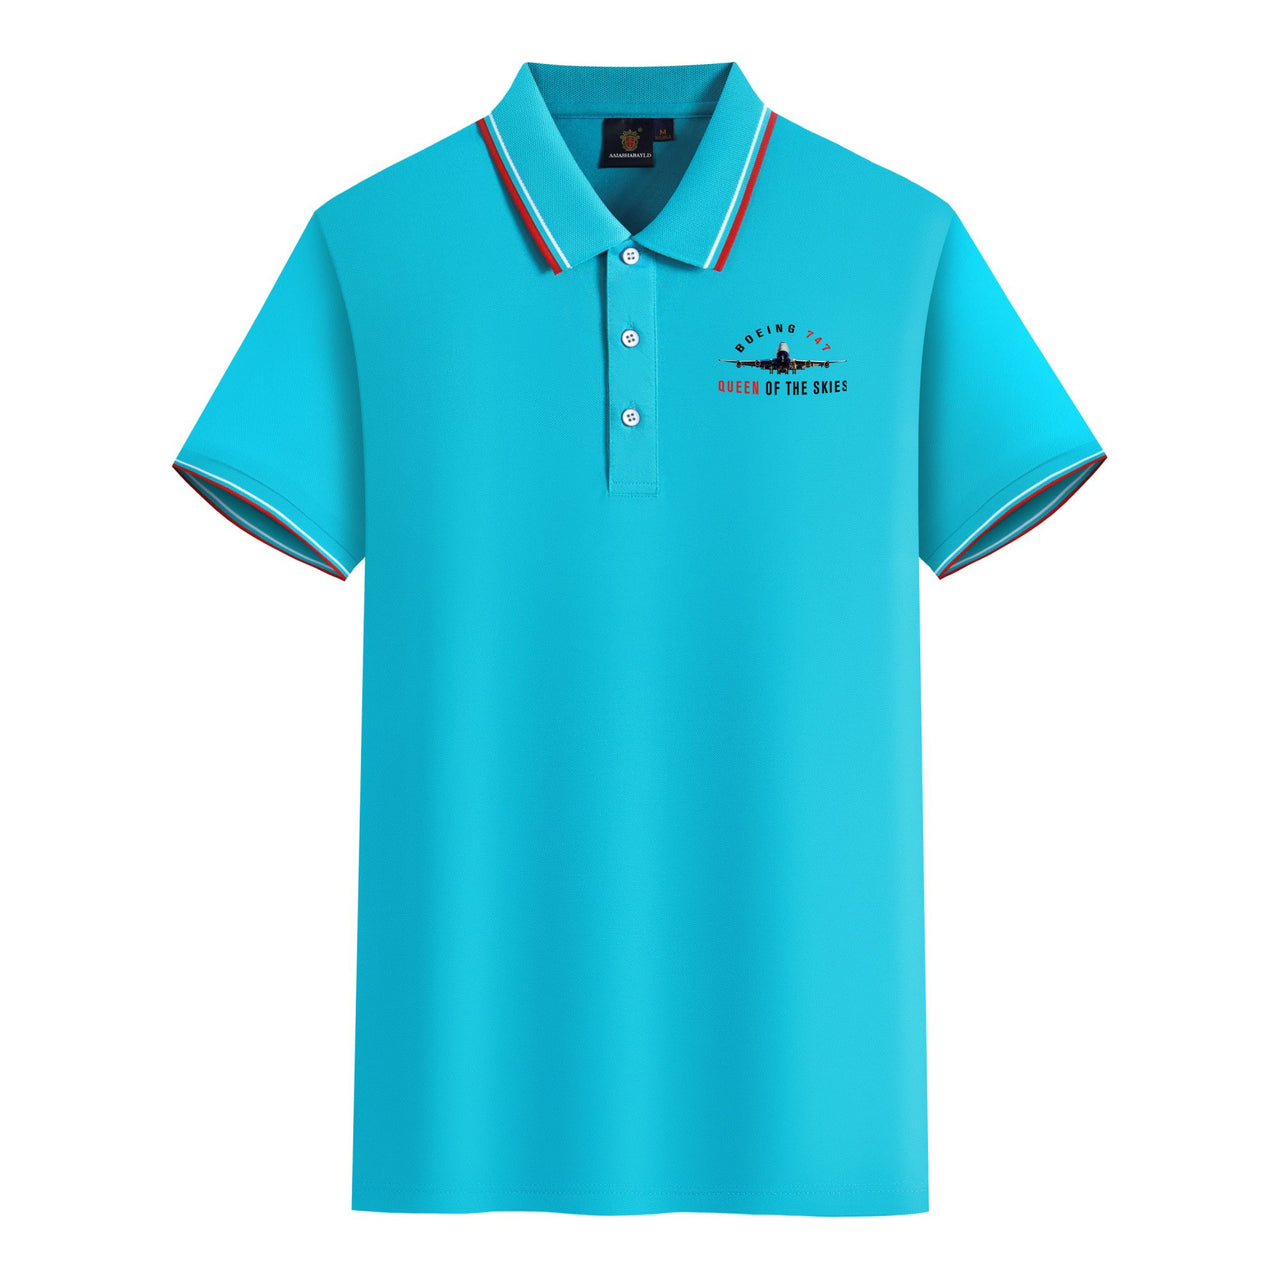 Boeing 747 Queen of the Skies Designed Stylish Polo T-Shirts